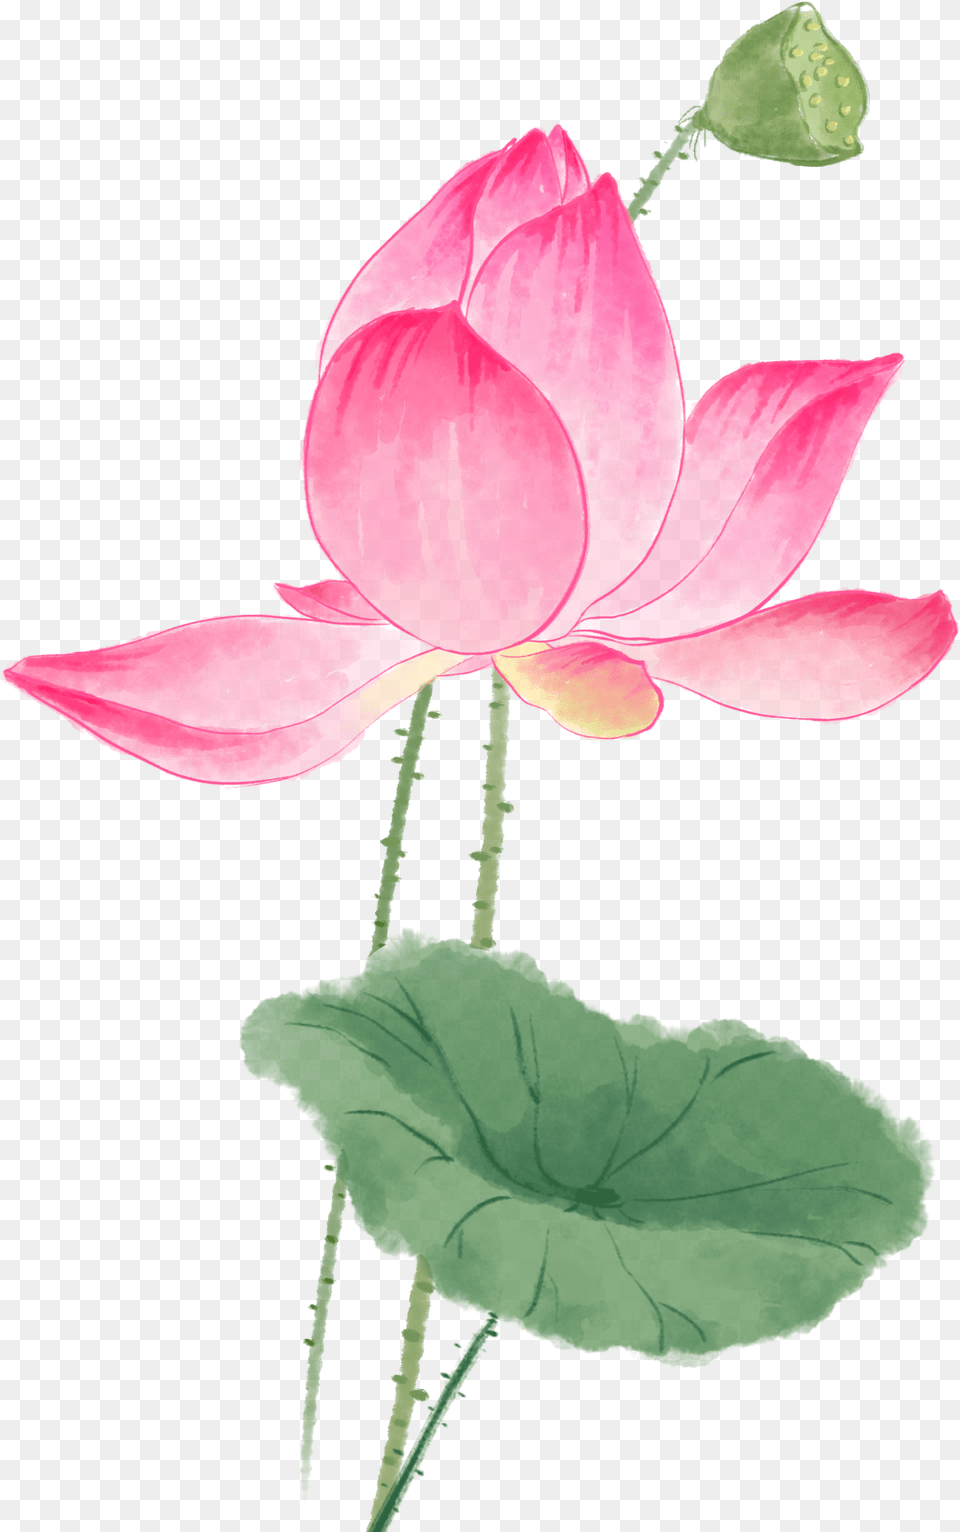 Watercolor Painting, Flower, Plant, Petal, Lily Png